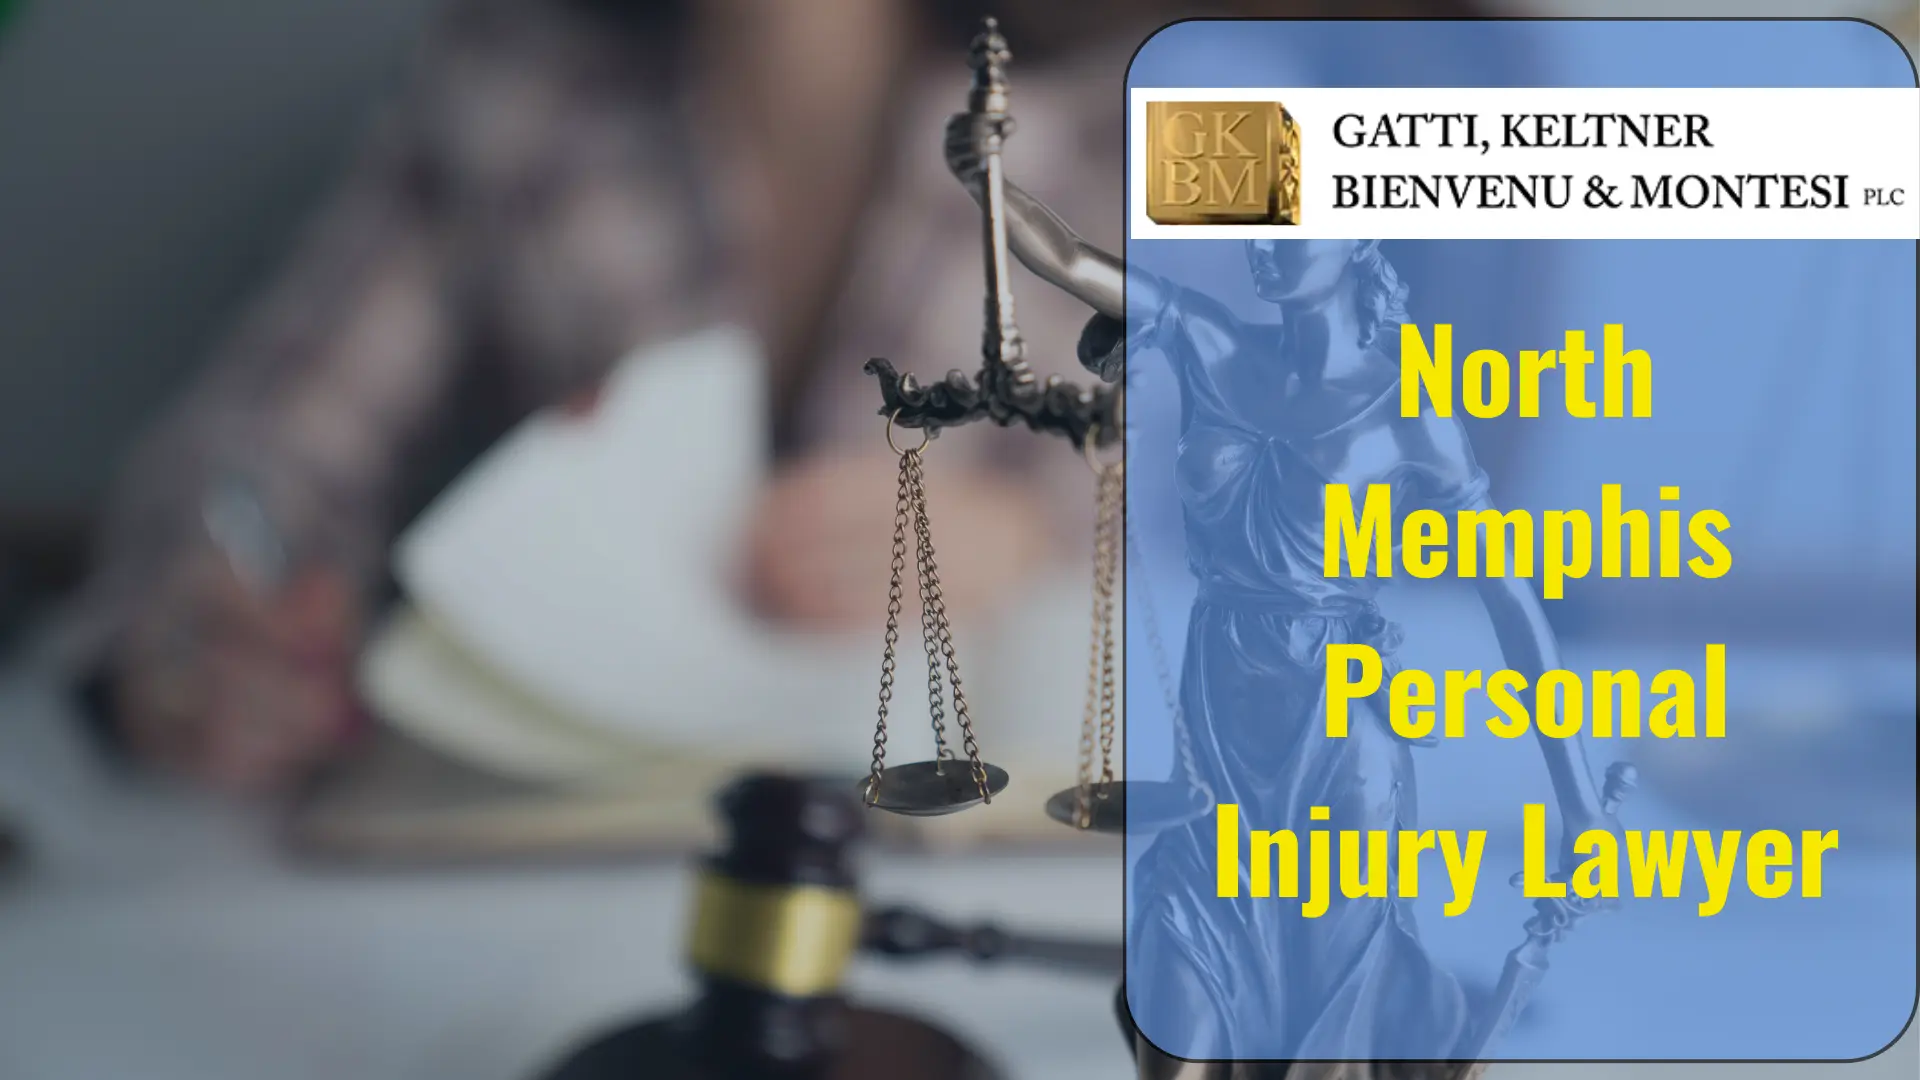 North Memphis Personal Injury Lawyer